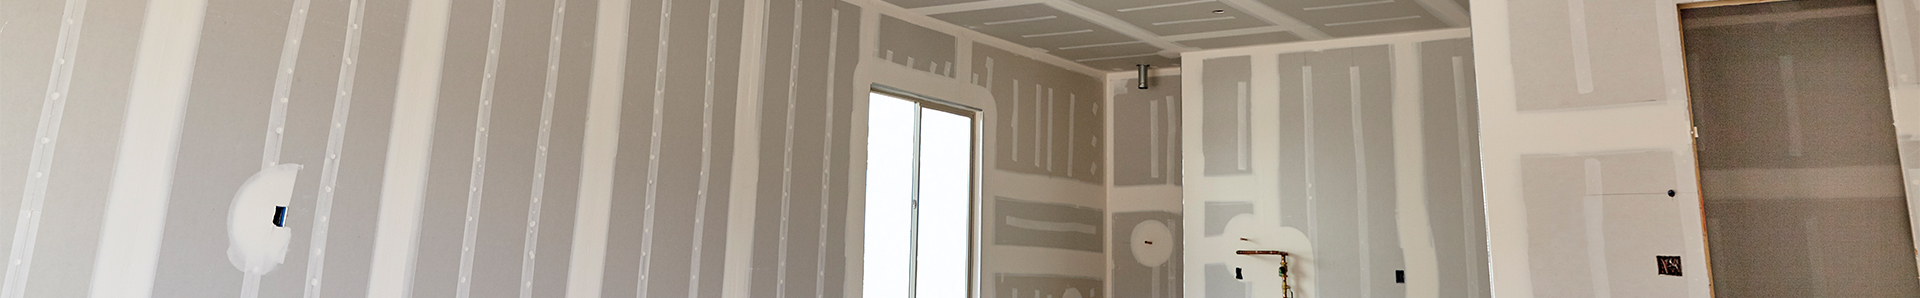 Image of Drywall applied to room